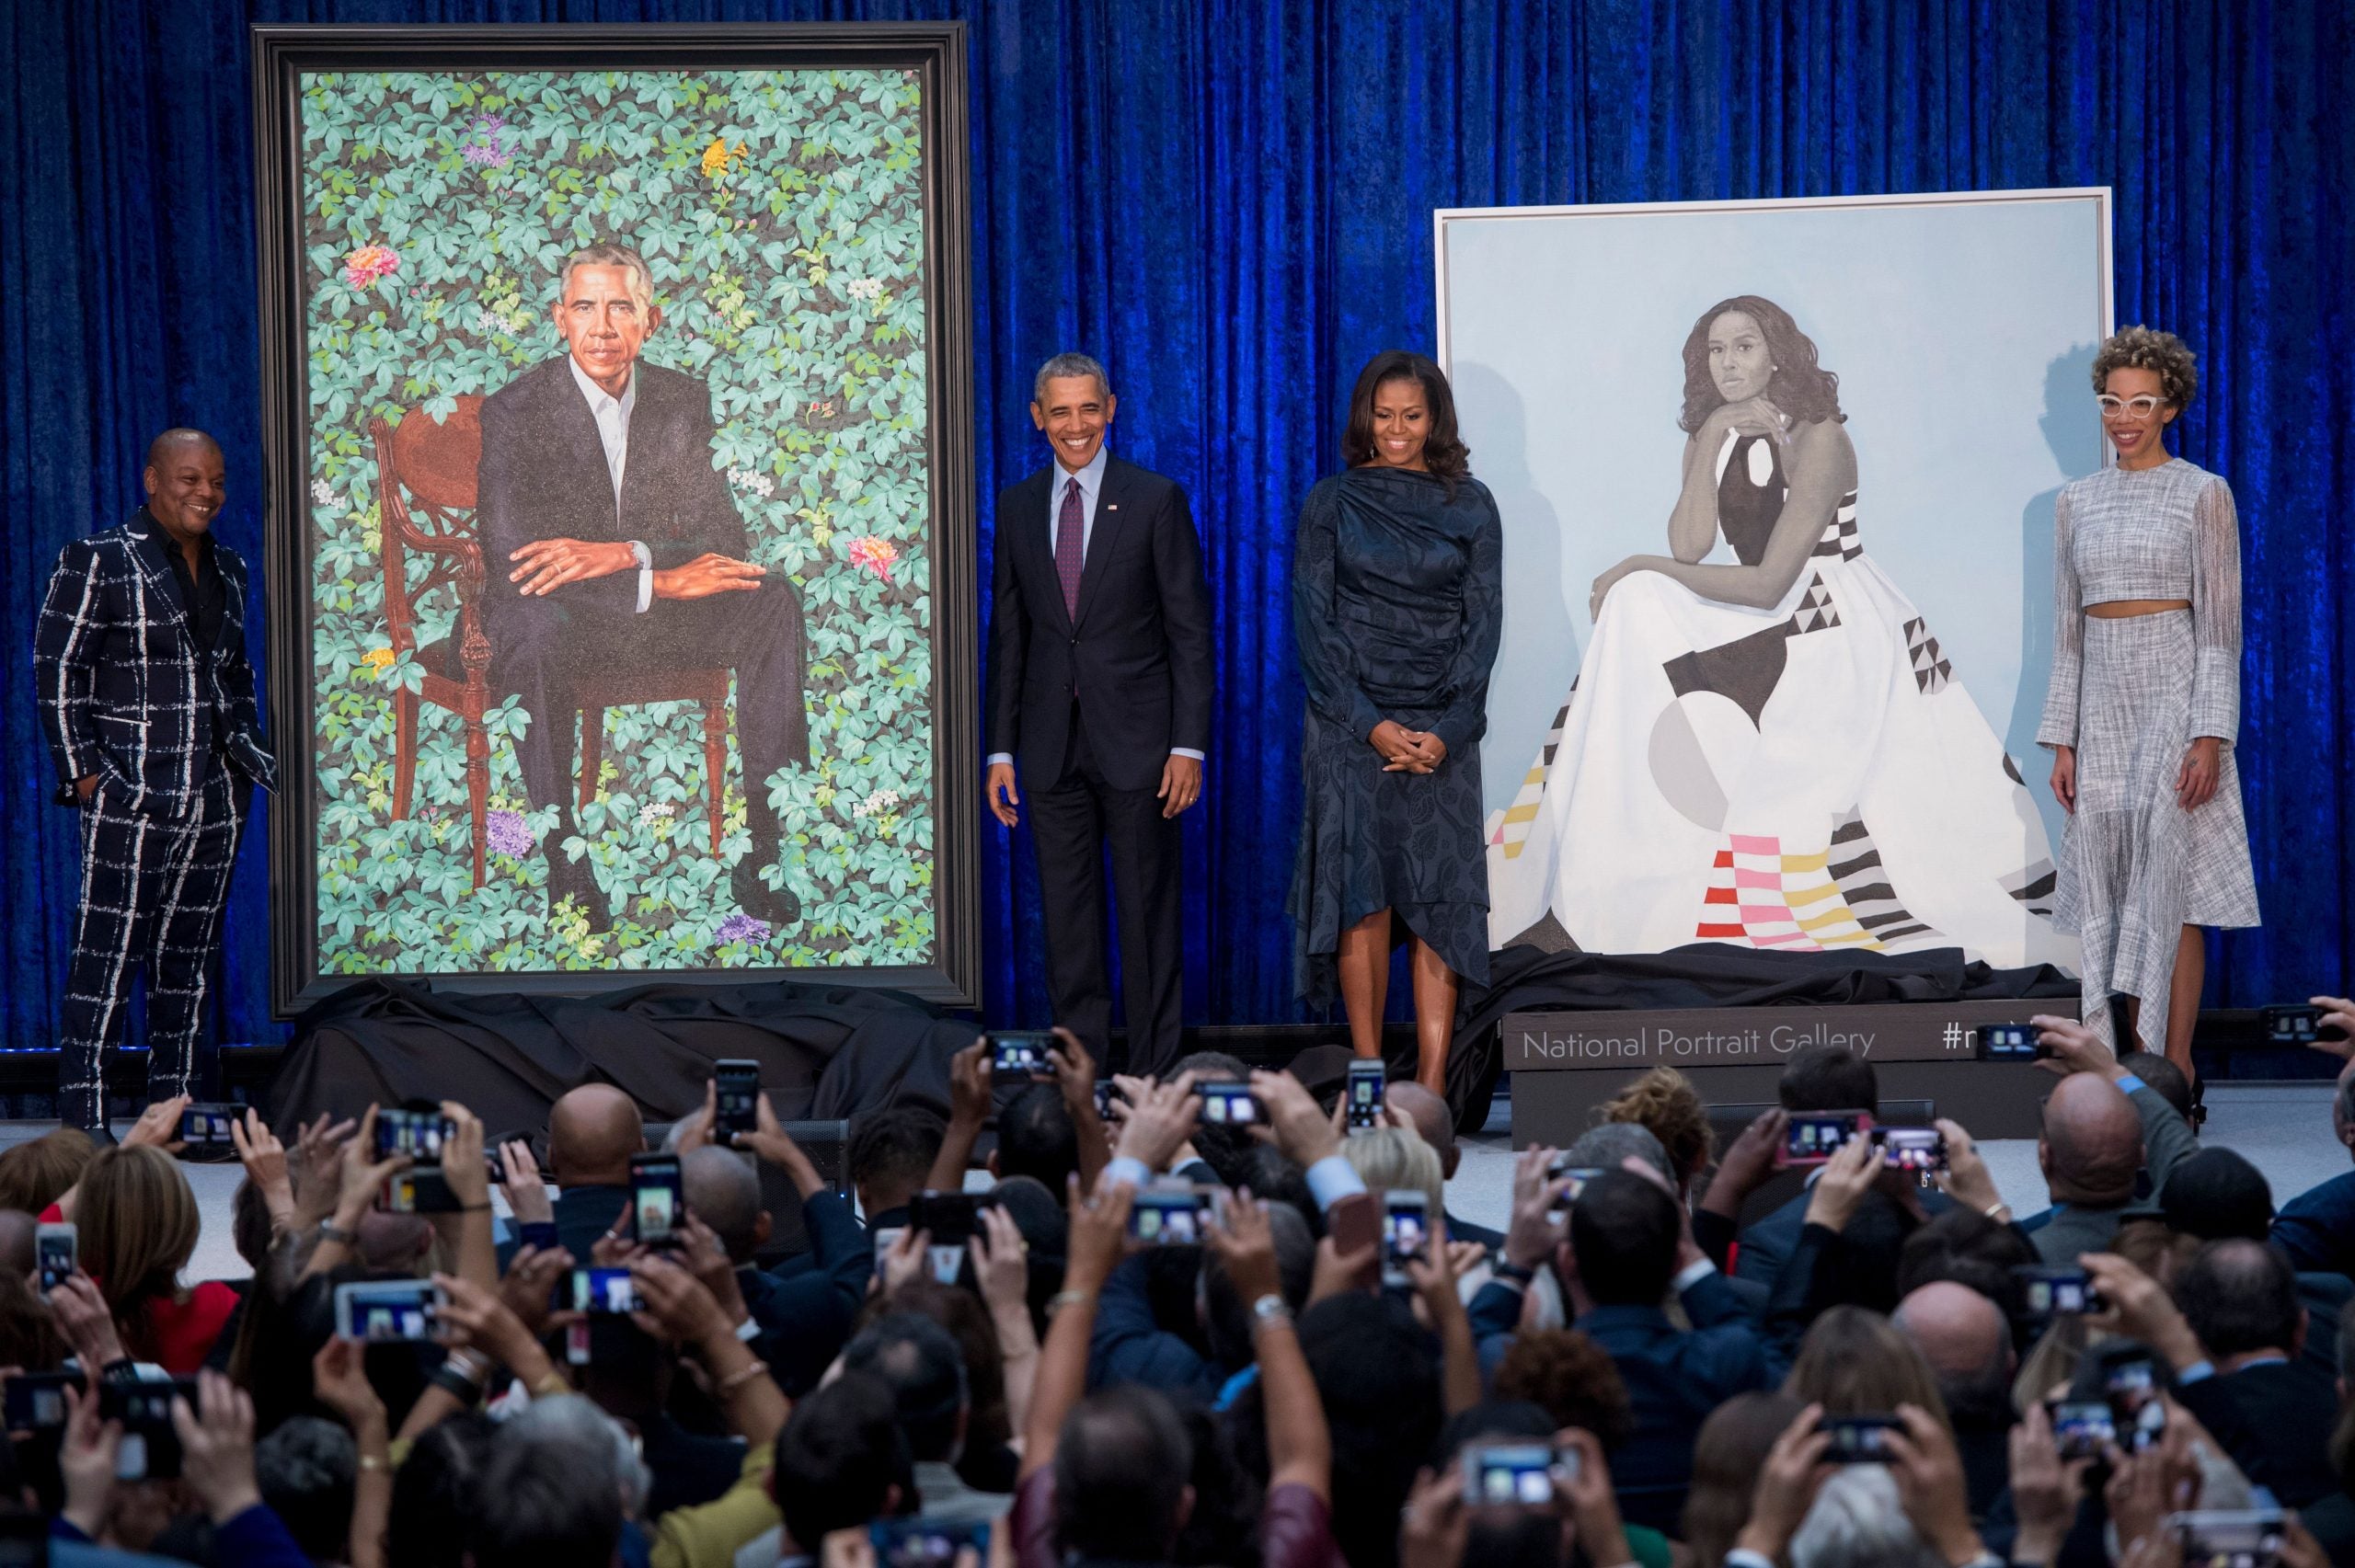 The Smithsonian Channel To Debut New Documentary, ‘Picturing The Obamas’